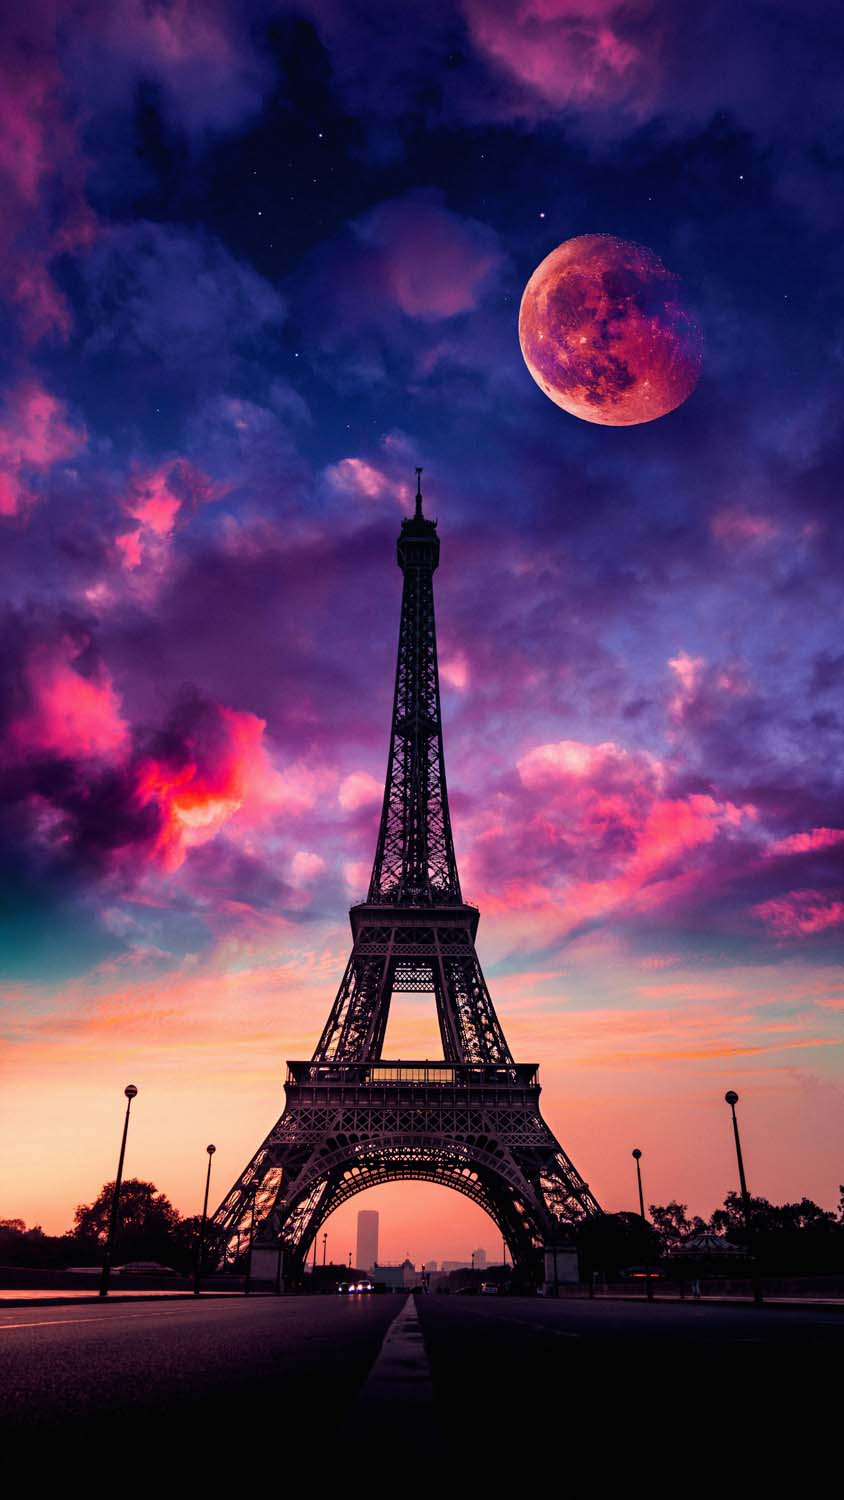 Eiffel Tower And Moon IPhone Wallpaper HD  IPhone Wallpapers